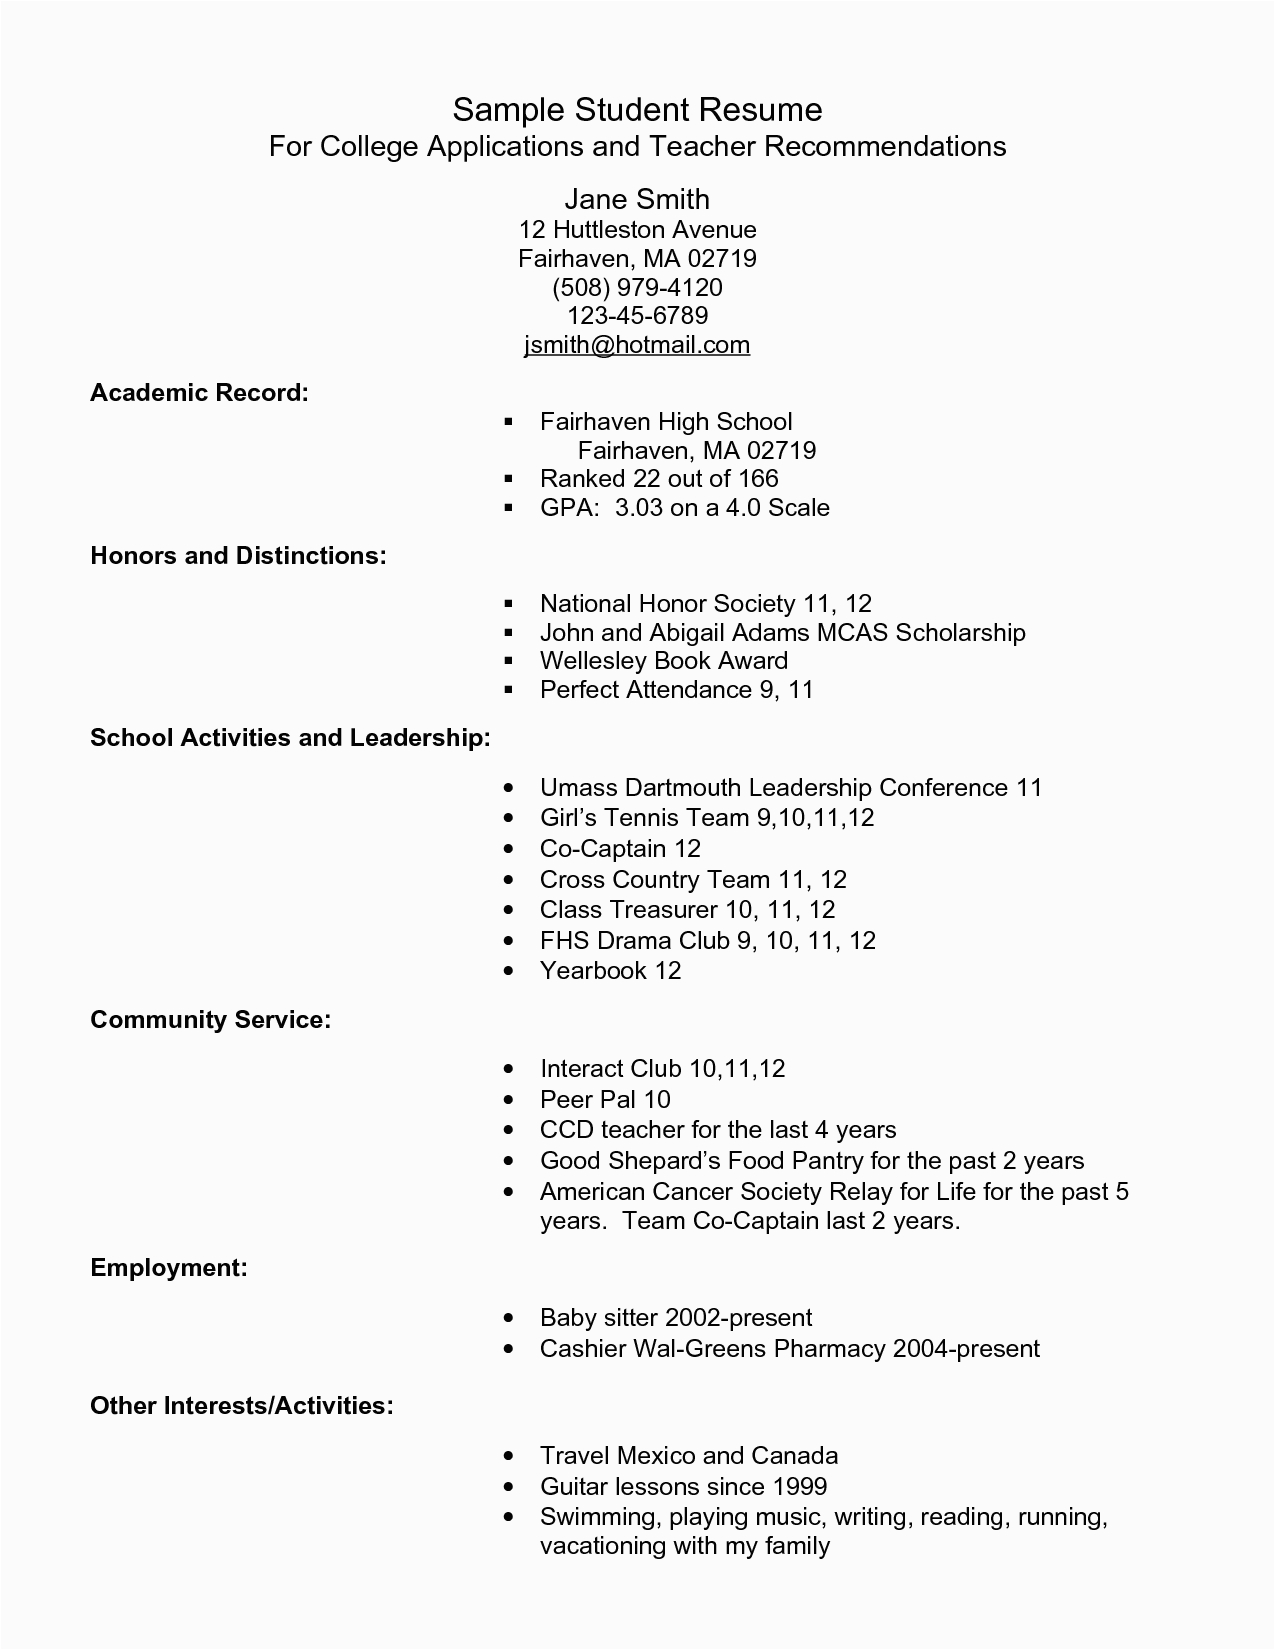 Sample Resume for Us University Application College Admission Resume Template